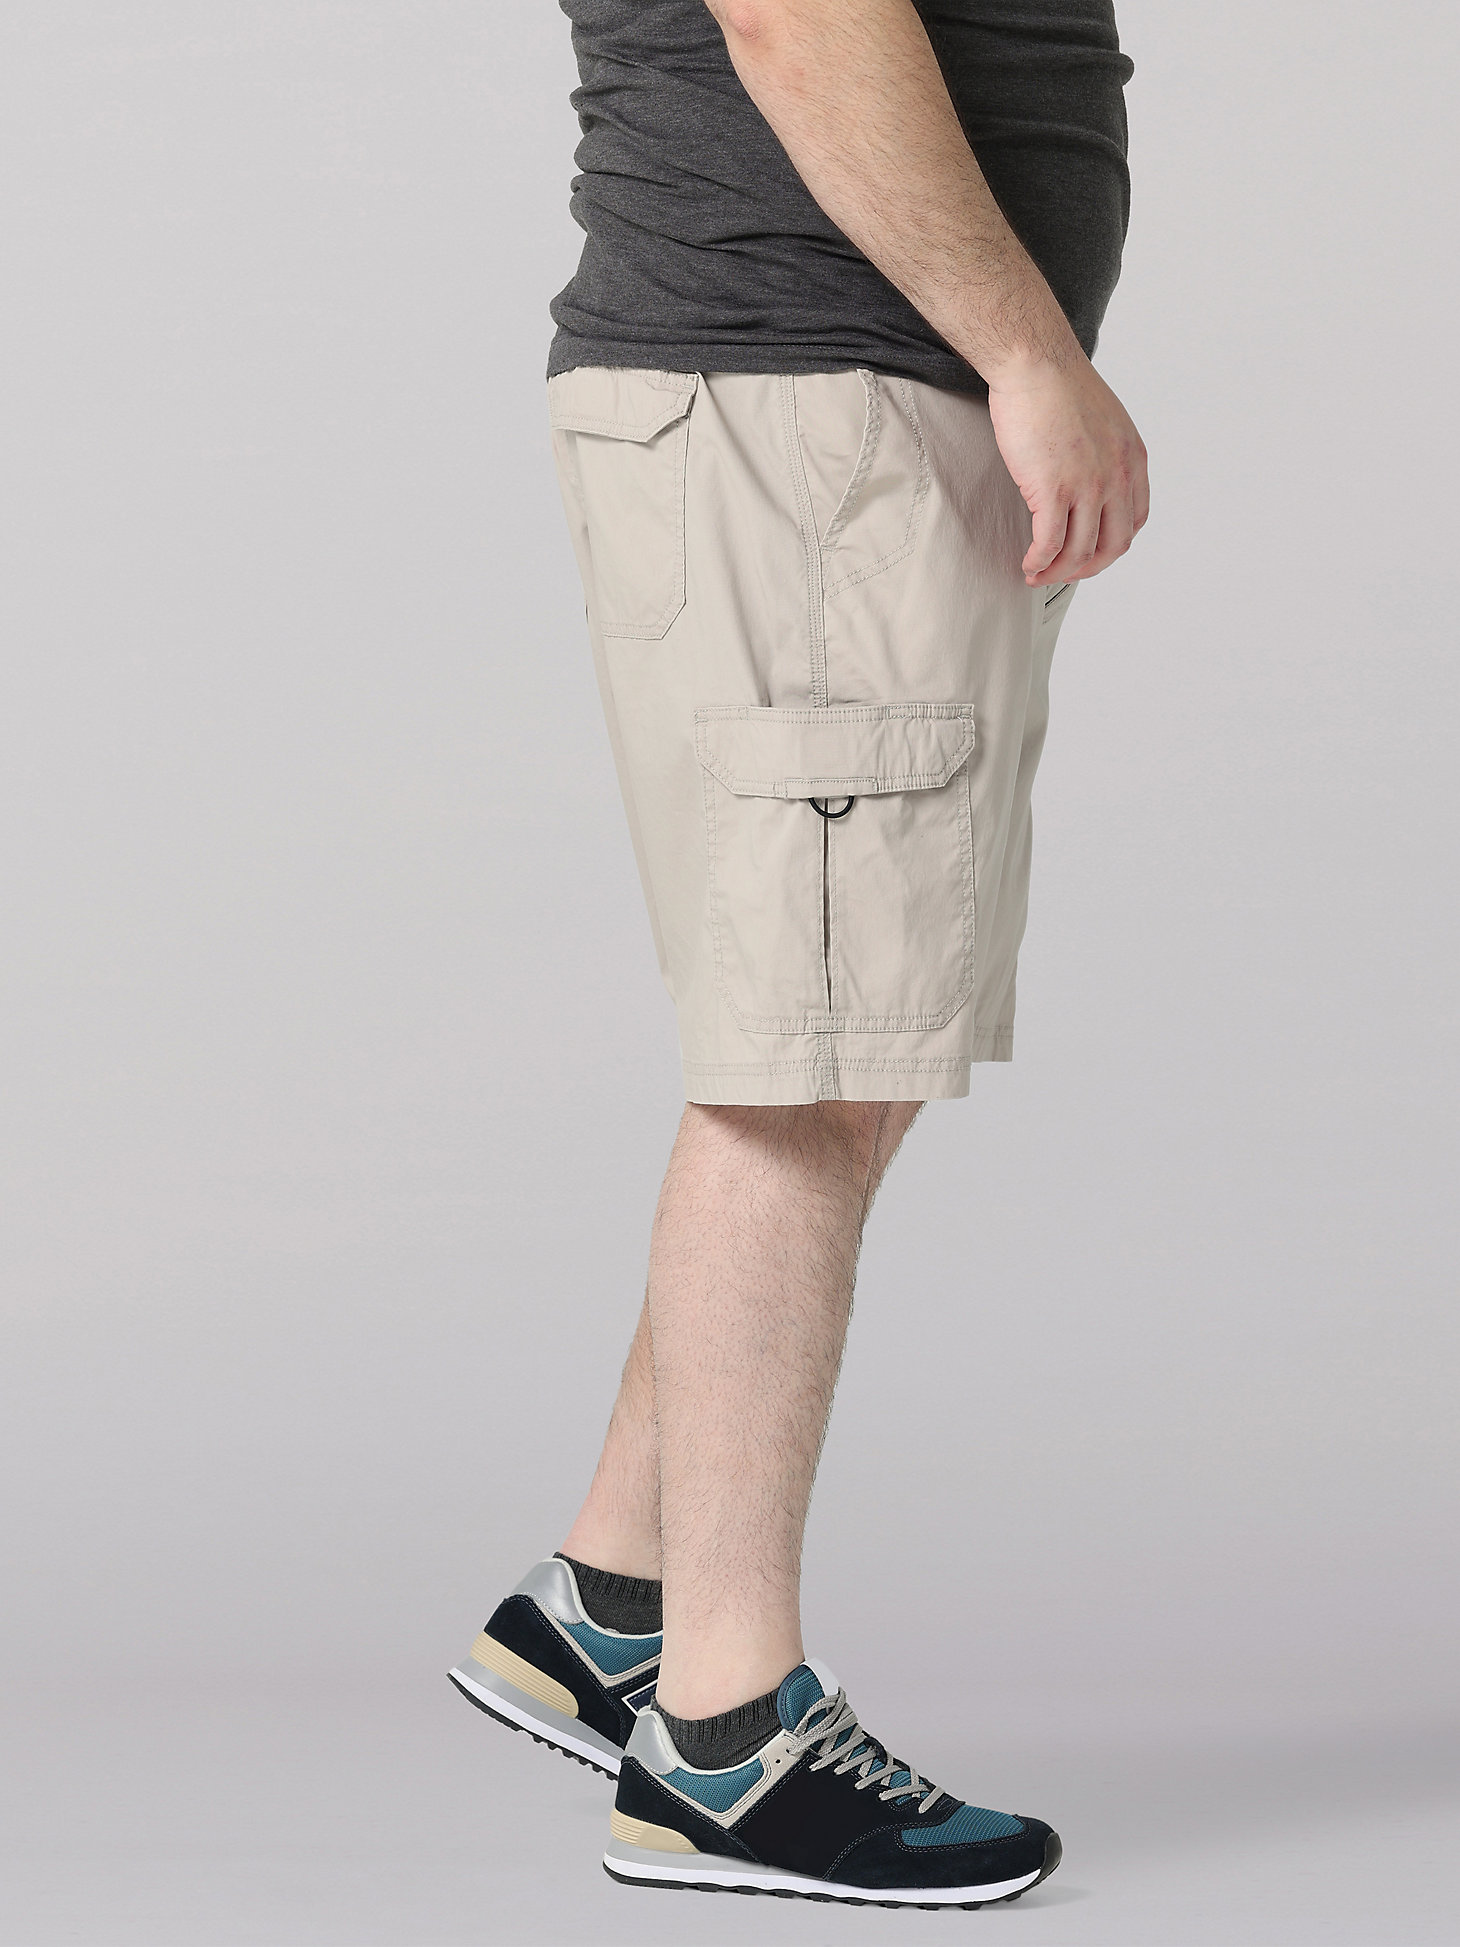 Men's Extreme Motion Crossroad Short (Big & Tall) in Stone alternative view 2